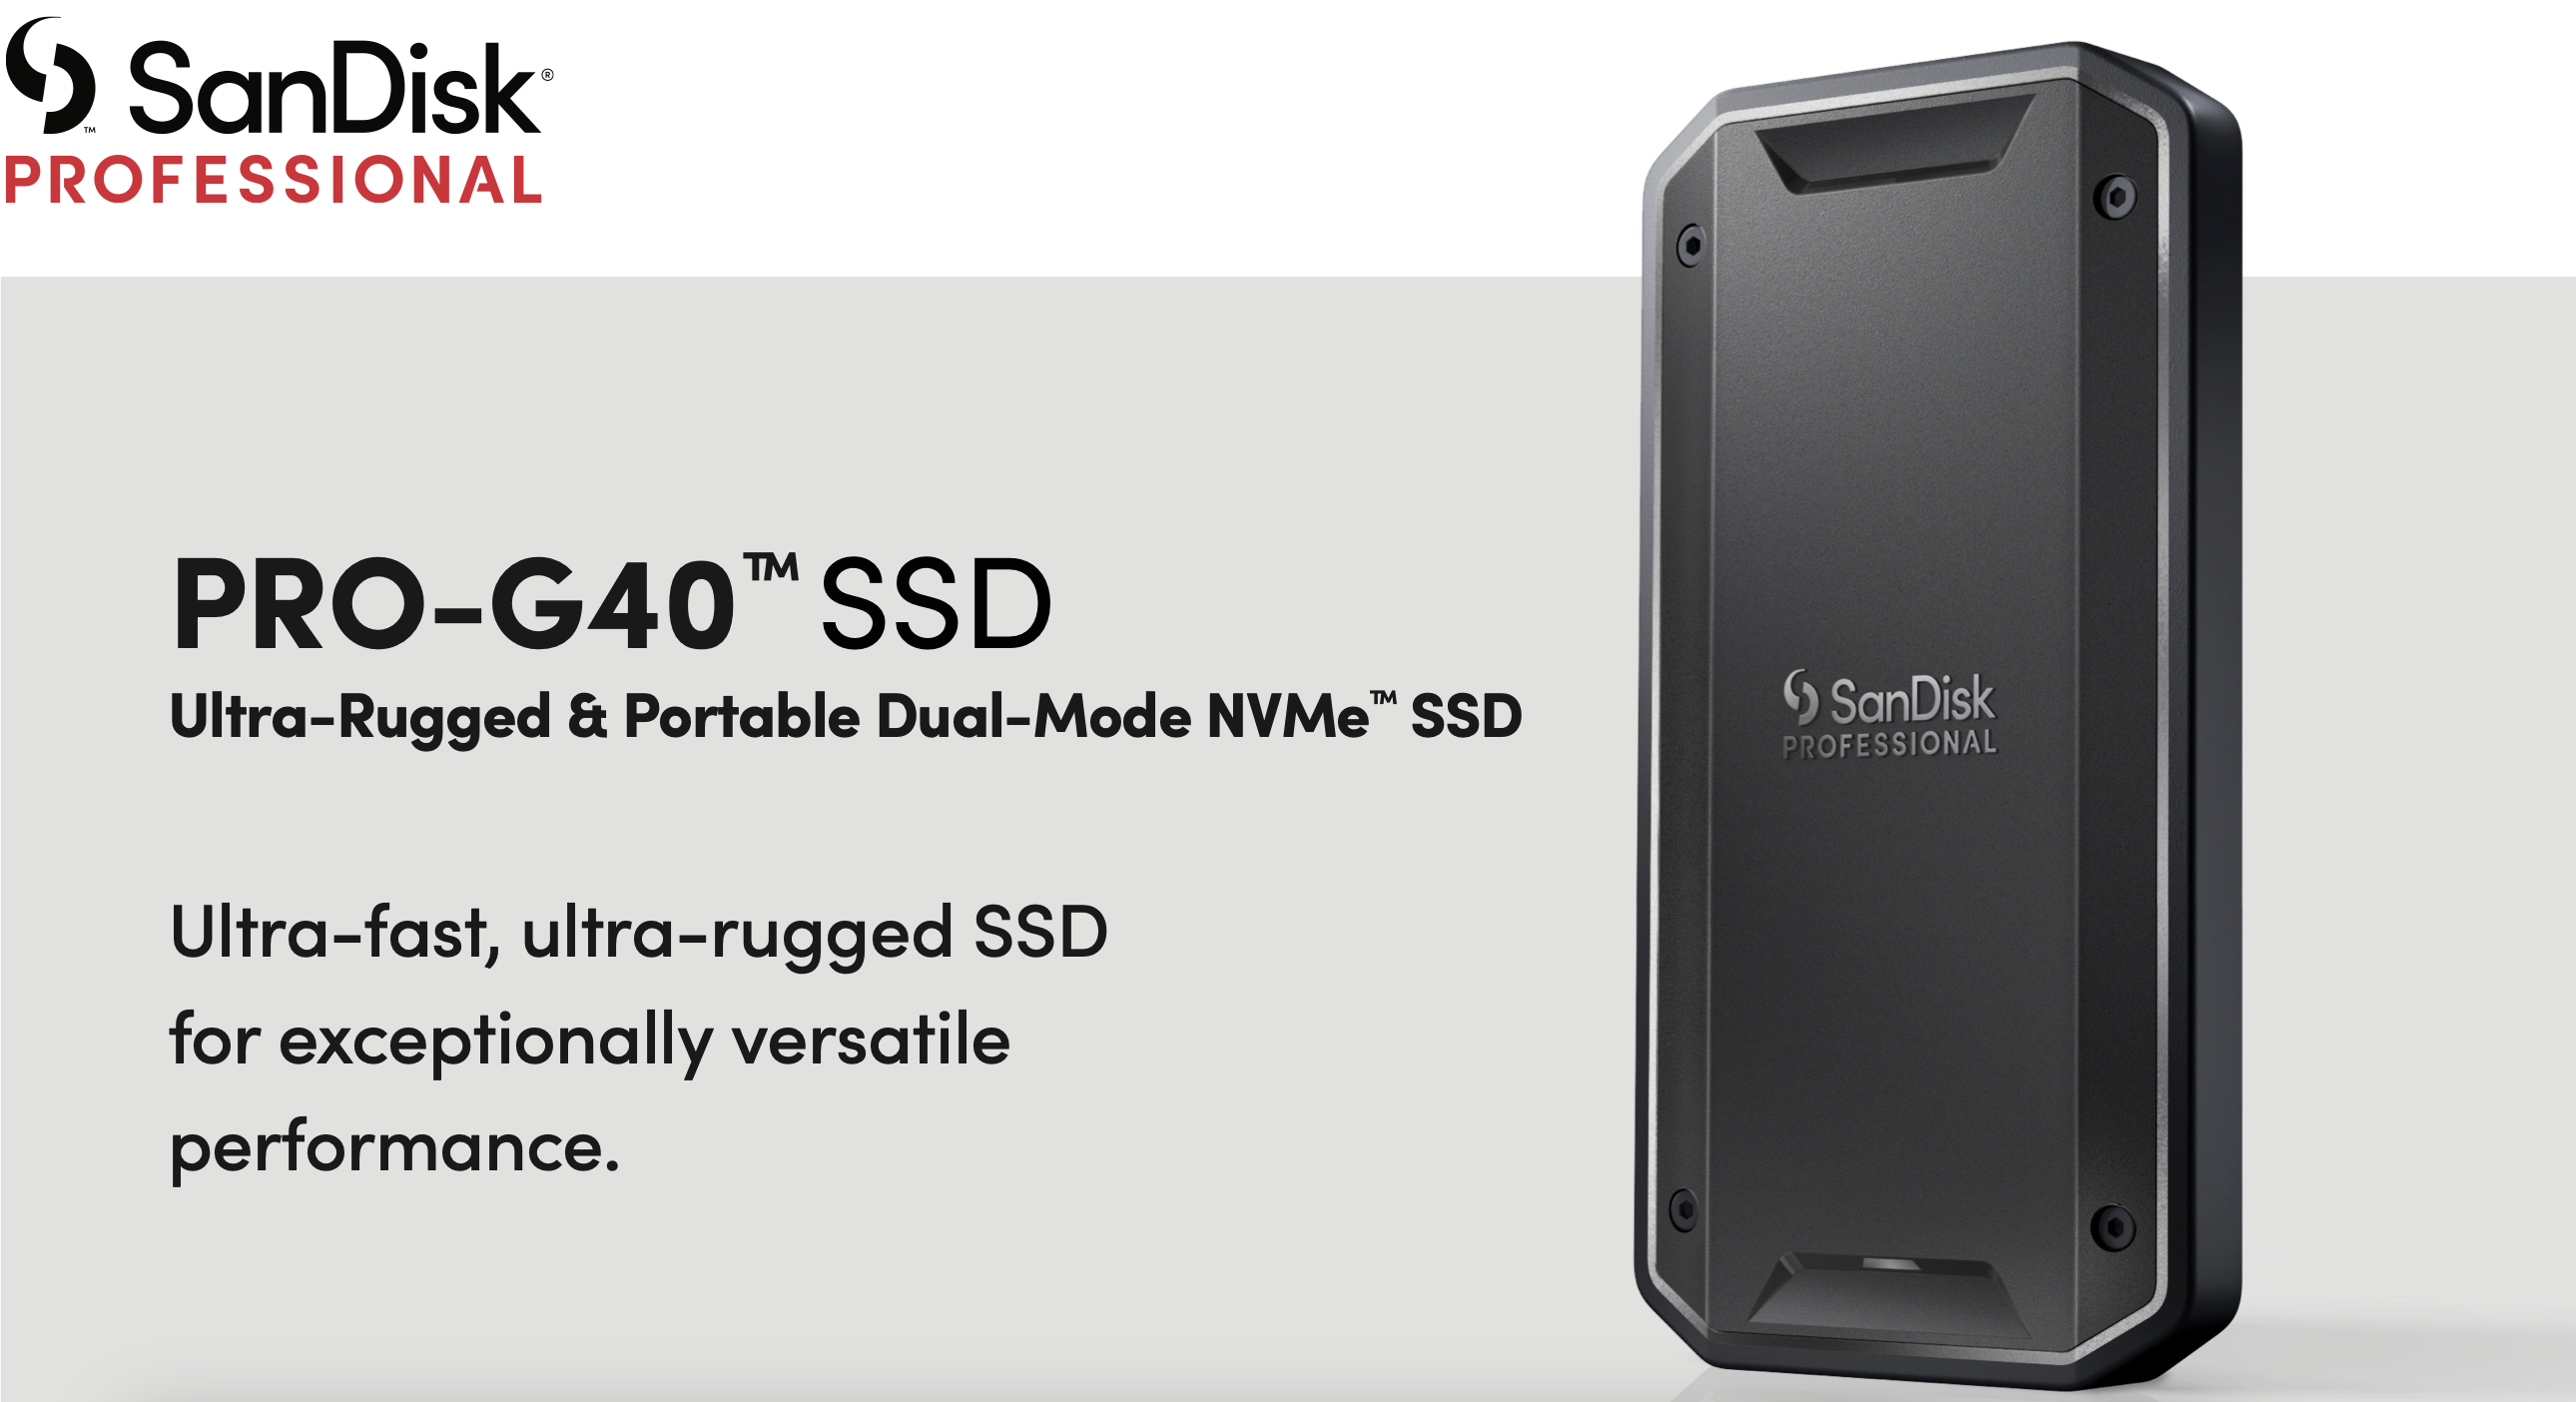 SanDisk Professional 4TB PRO-G40 SSD Thunderbolt 3 Portable SSD on sale for  $399.99 USD - Newsshooter